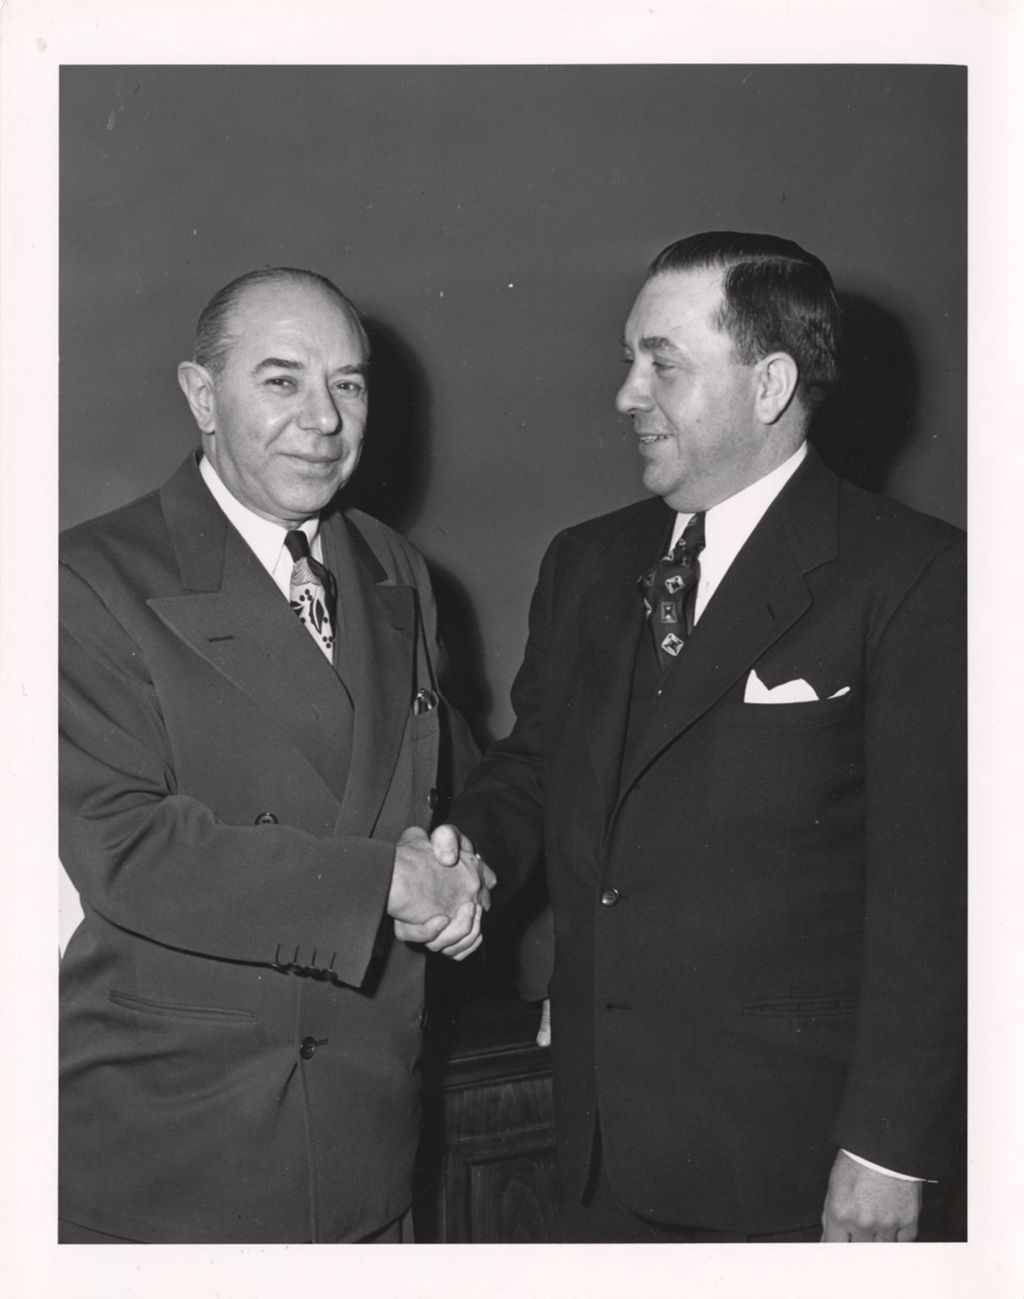 Miniature of Richard J. Daley and a Department of Revenue officer